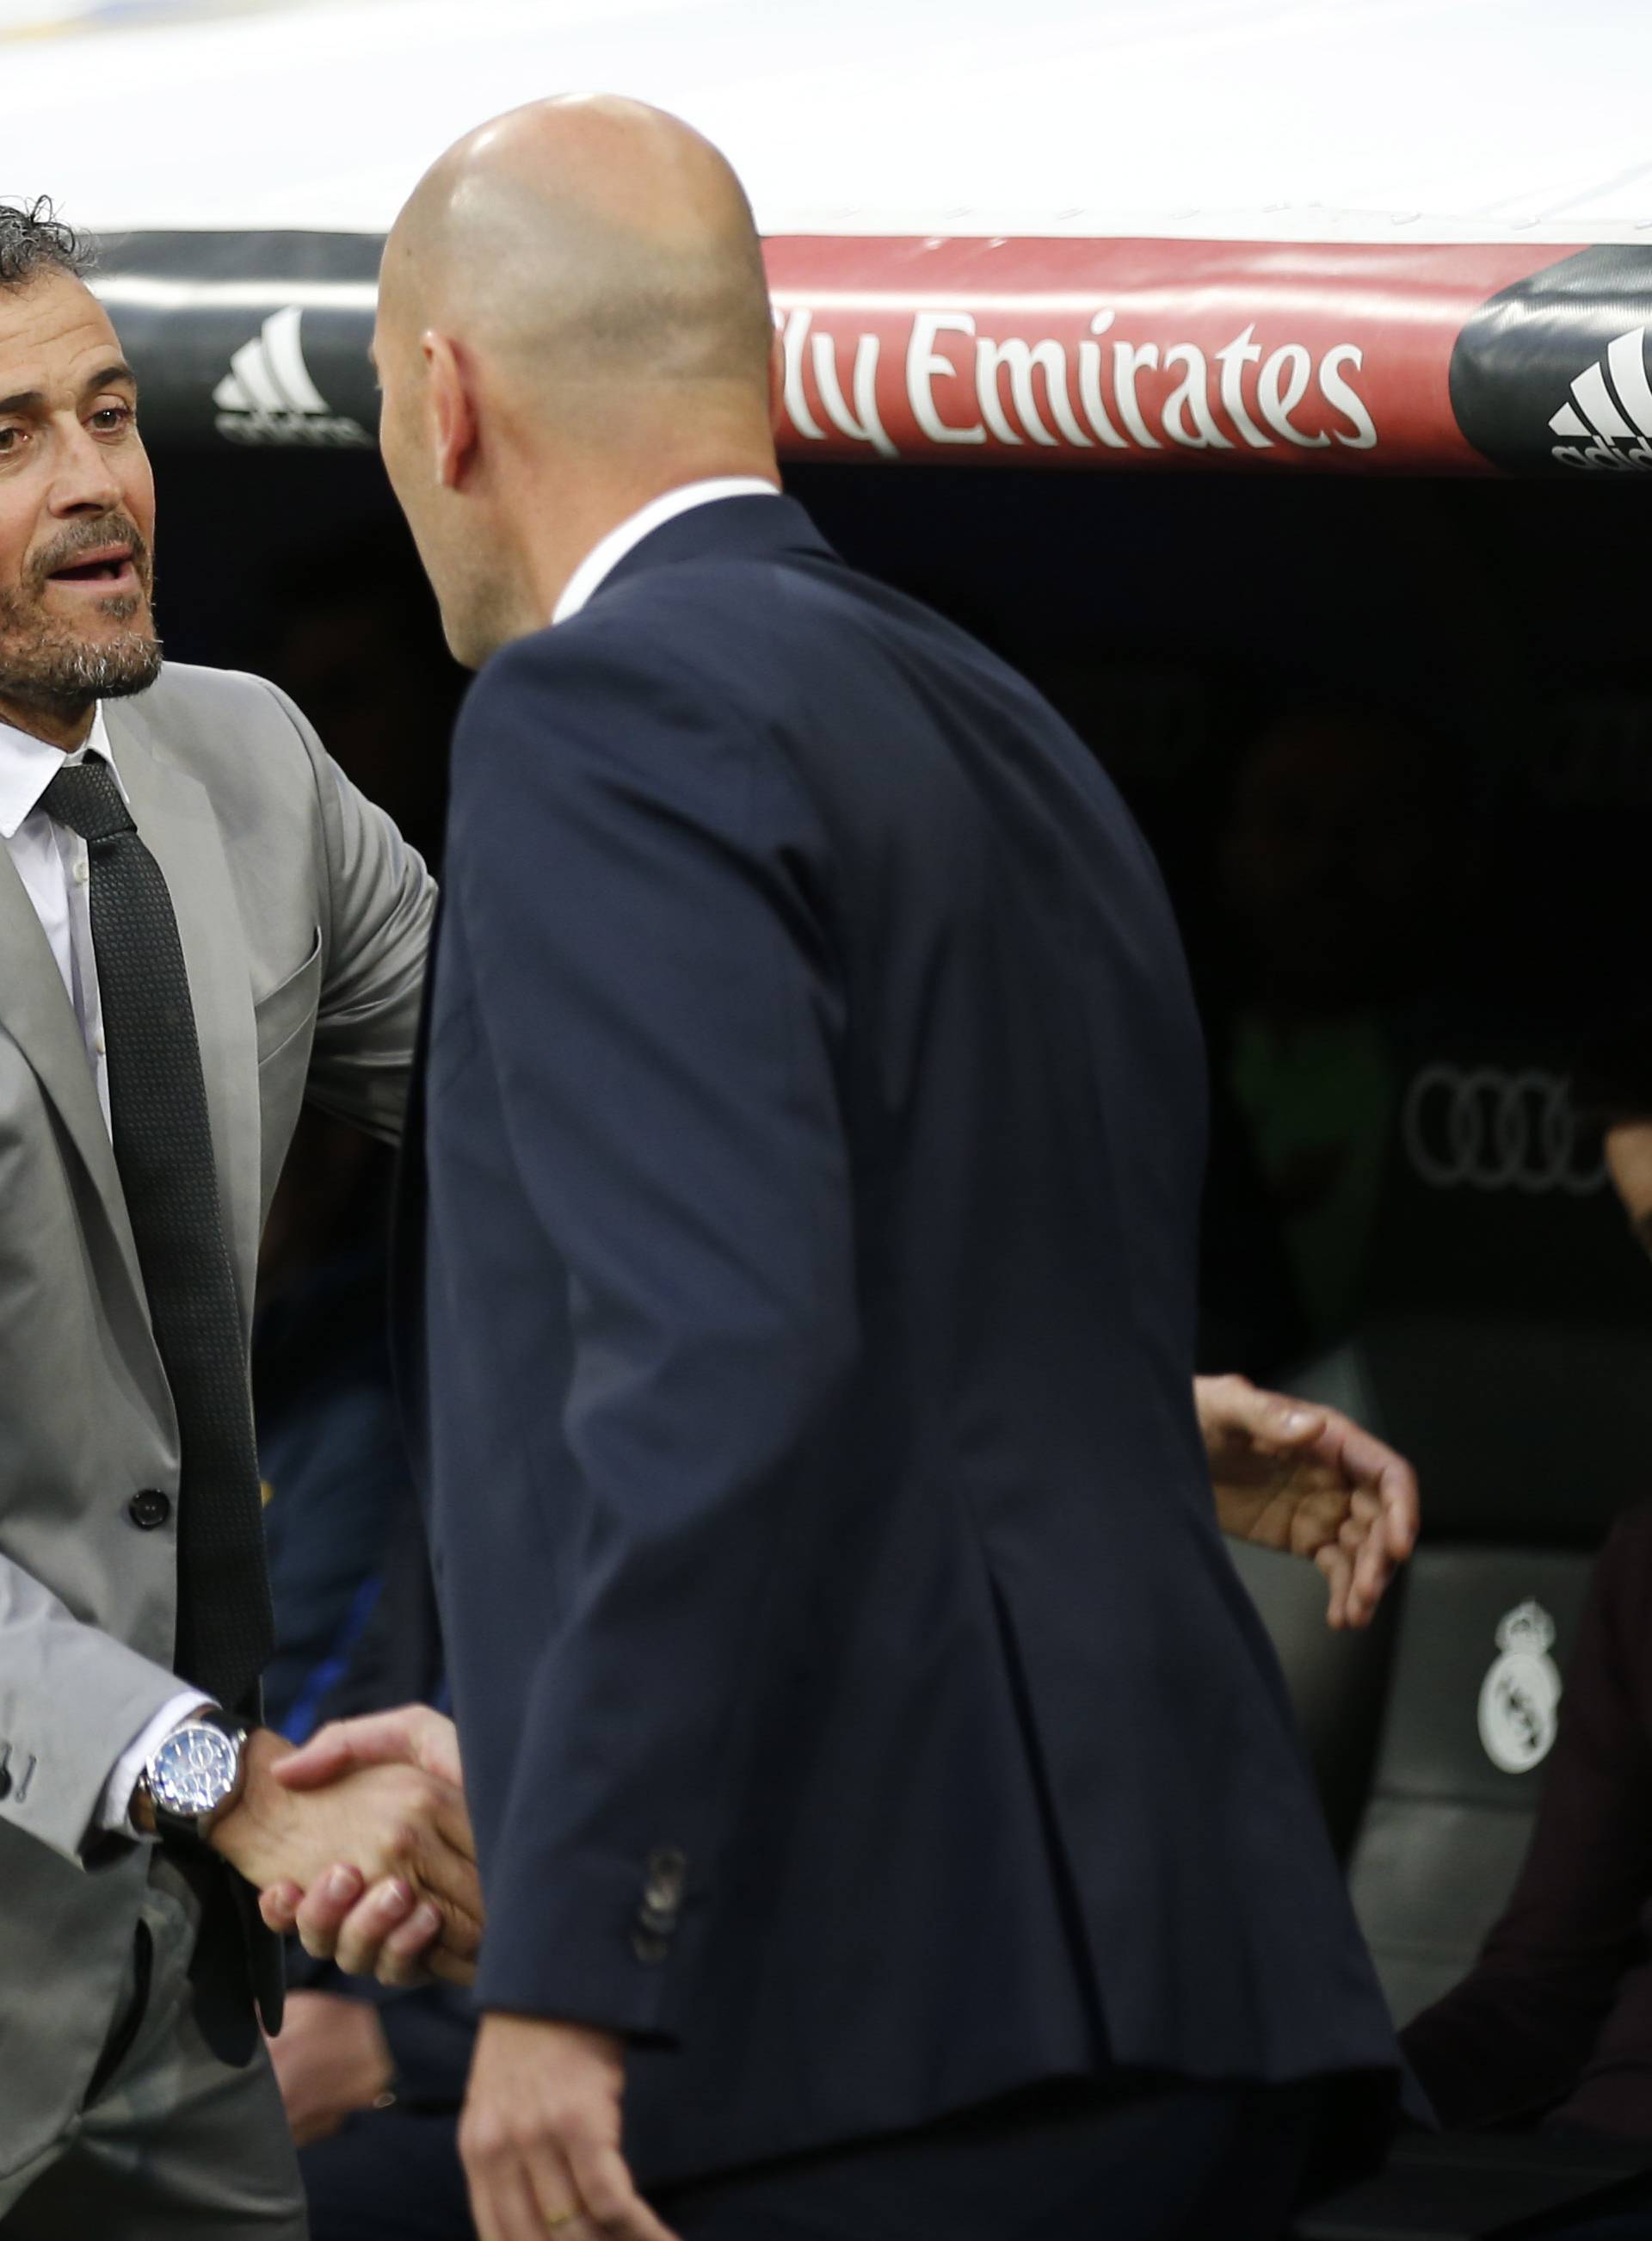 Real Madrid coach Zinedine Zidane and Barcelona coach Luis Enrique before the match